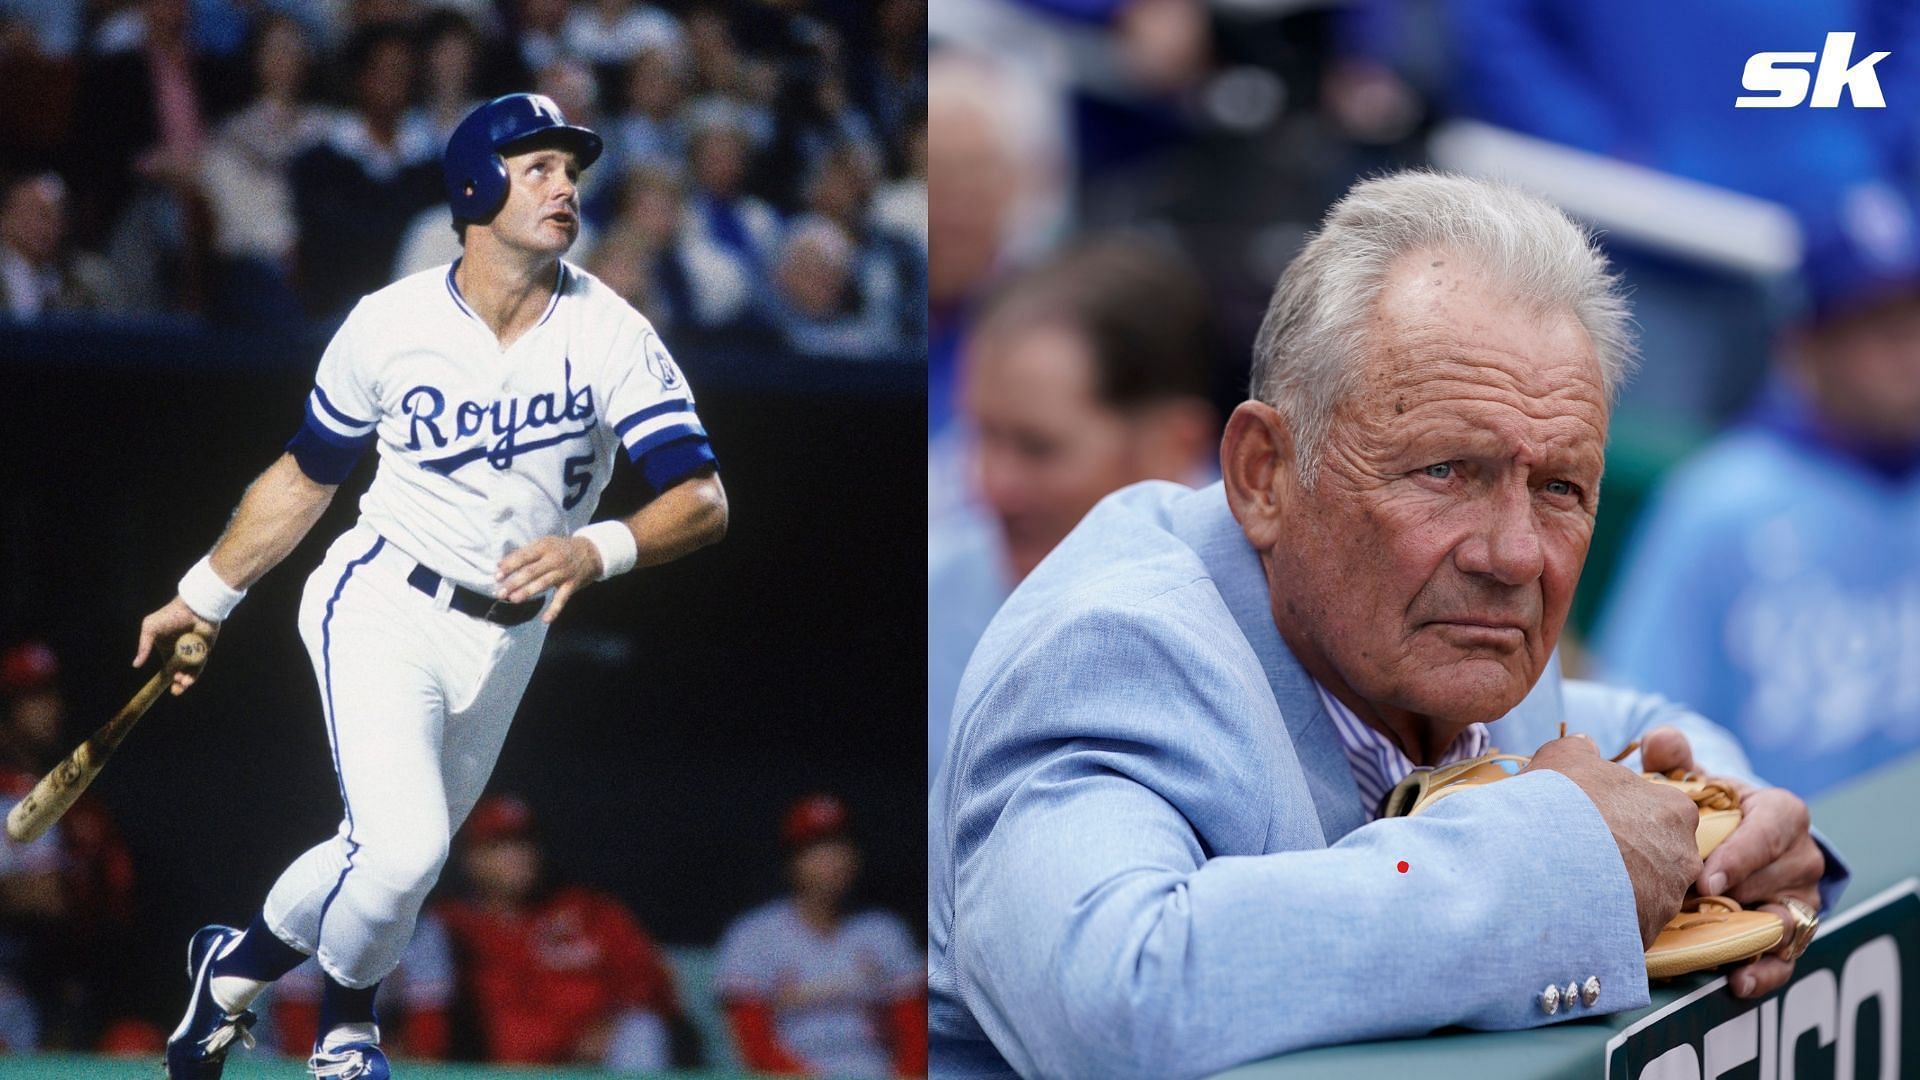 Royals legend George Brett purchased a luxury home in Arizona back in 2017